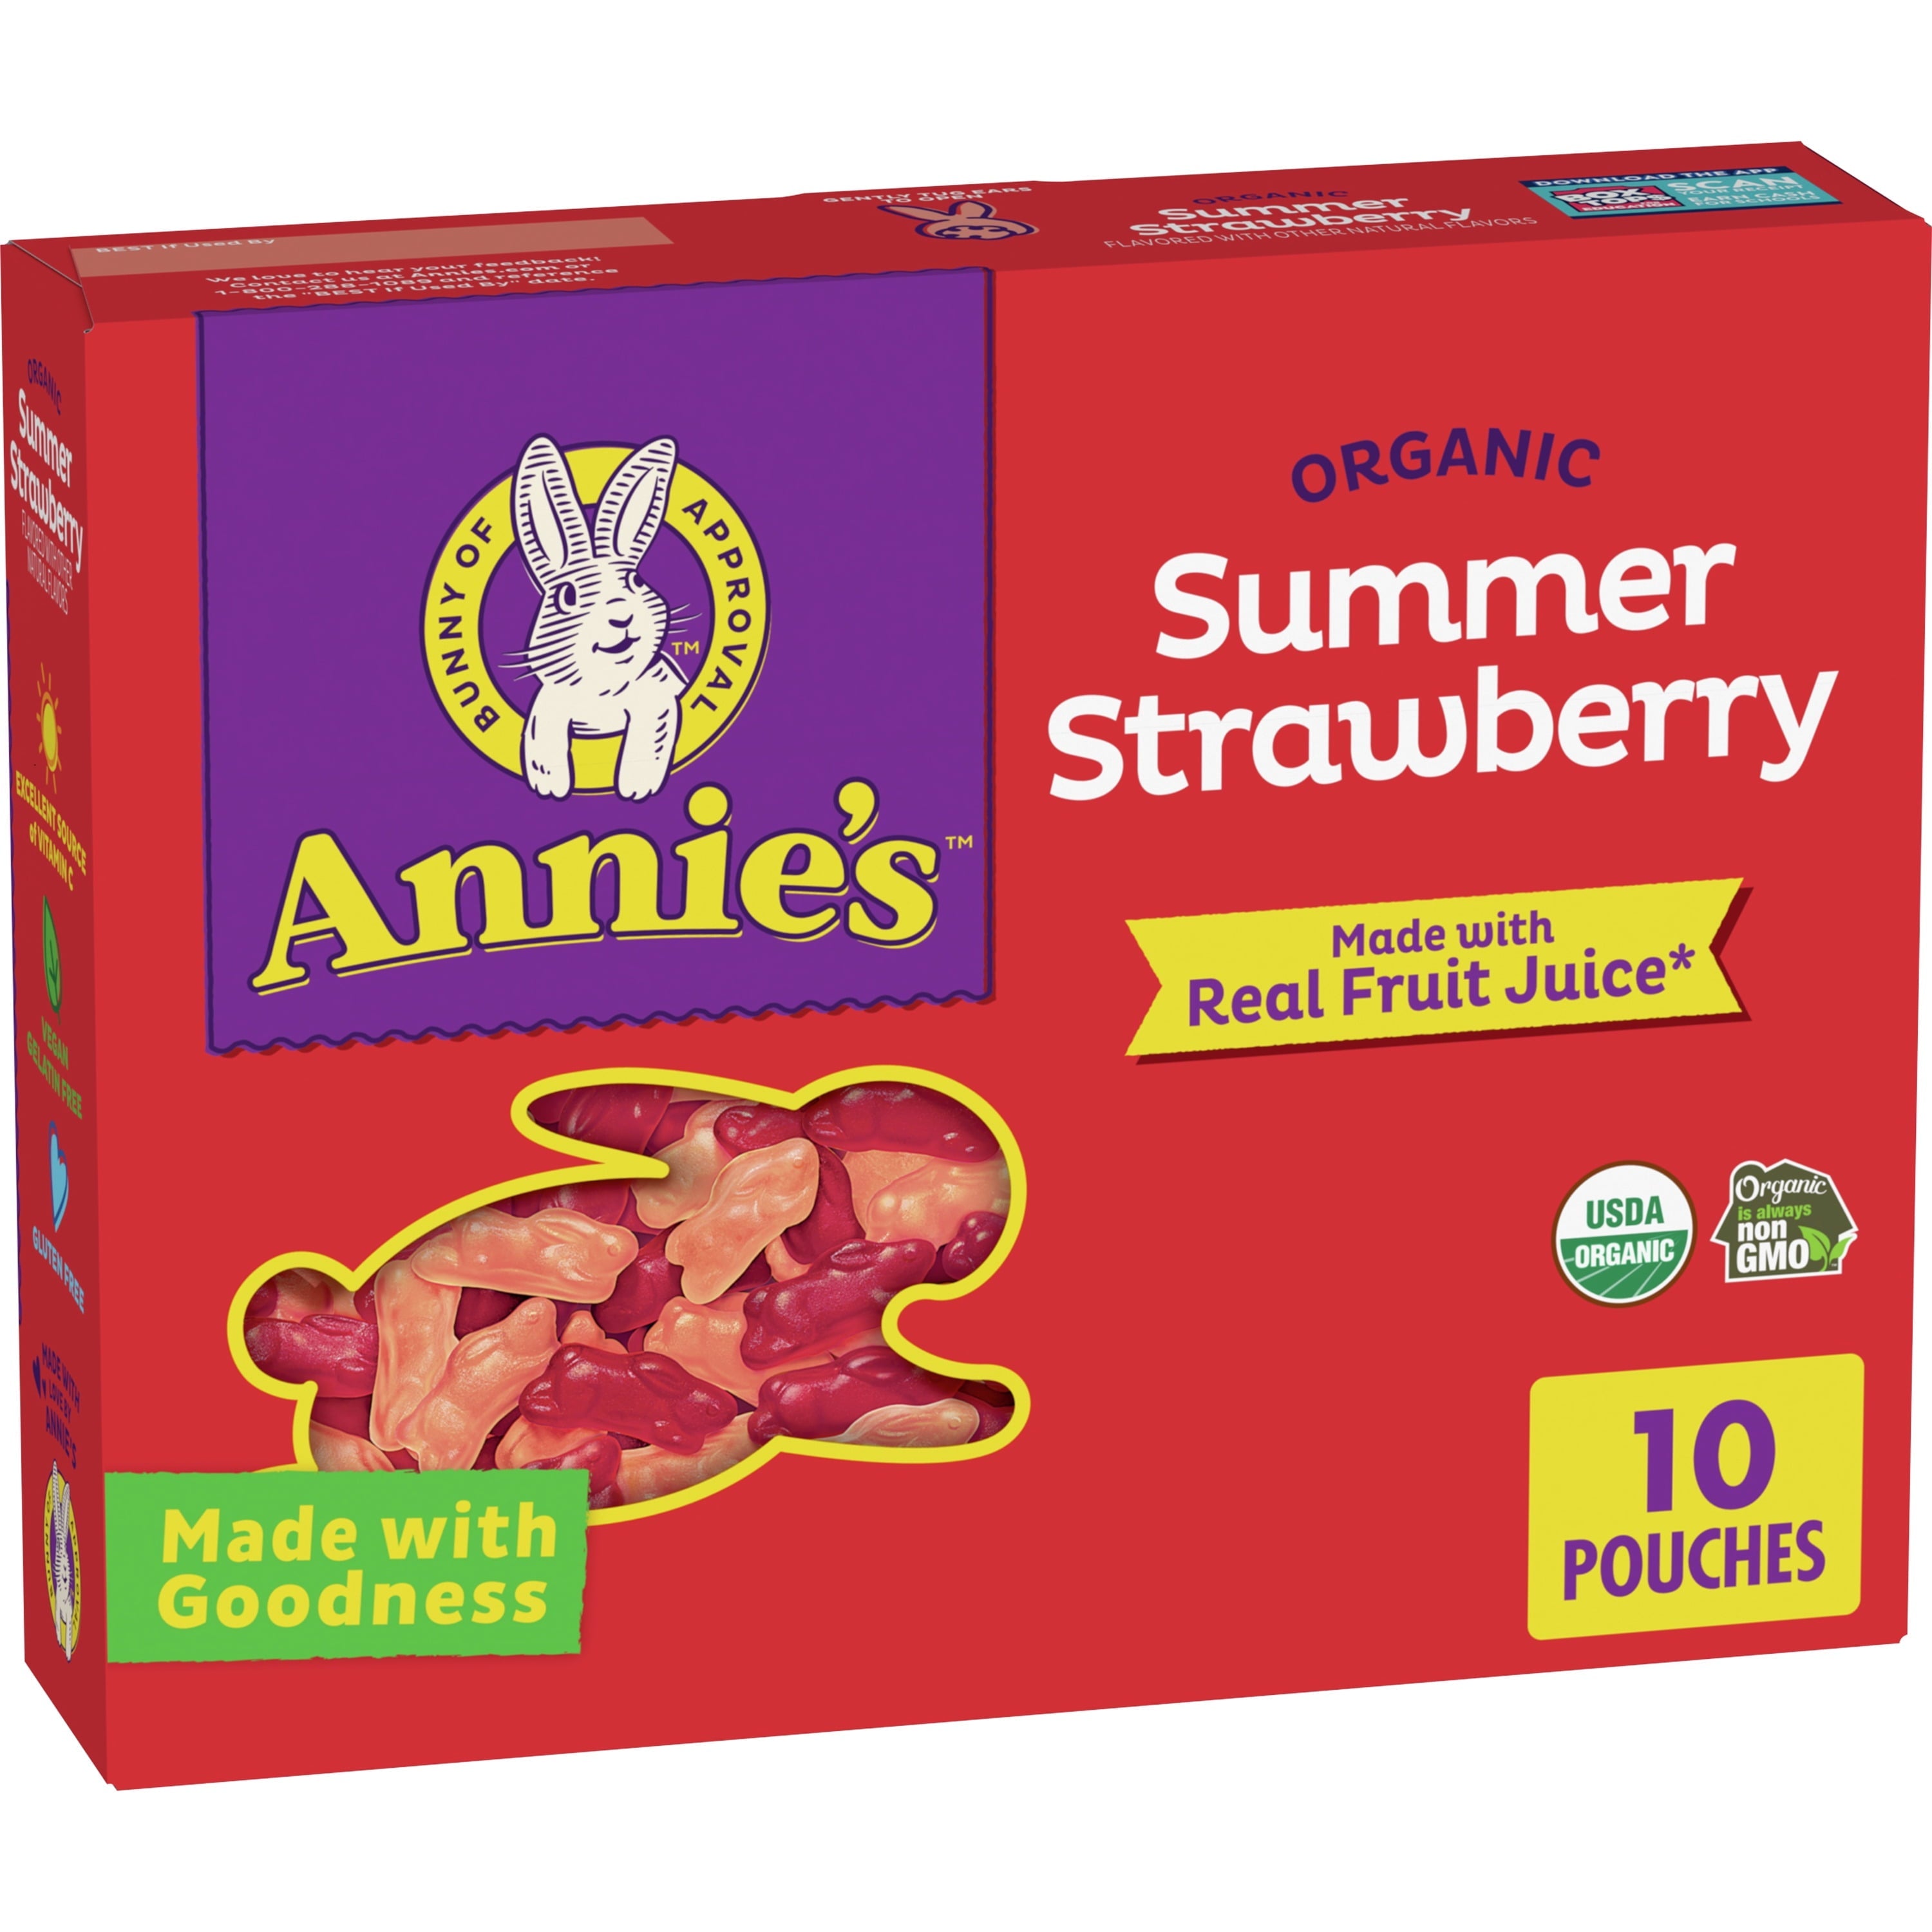 Annie's Homegrown Organic Summer Strawberry Bunny Fruit Flavored Snacks 10 Pouches Box